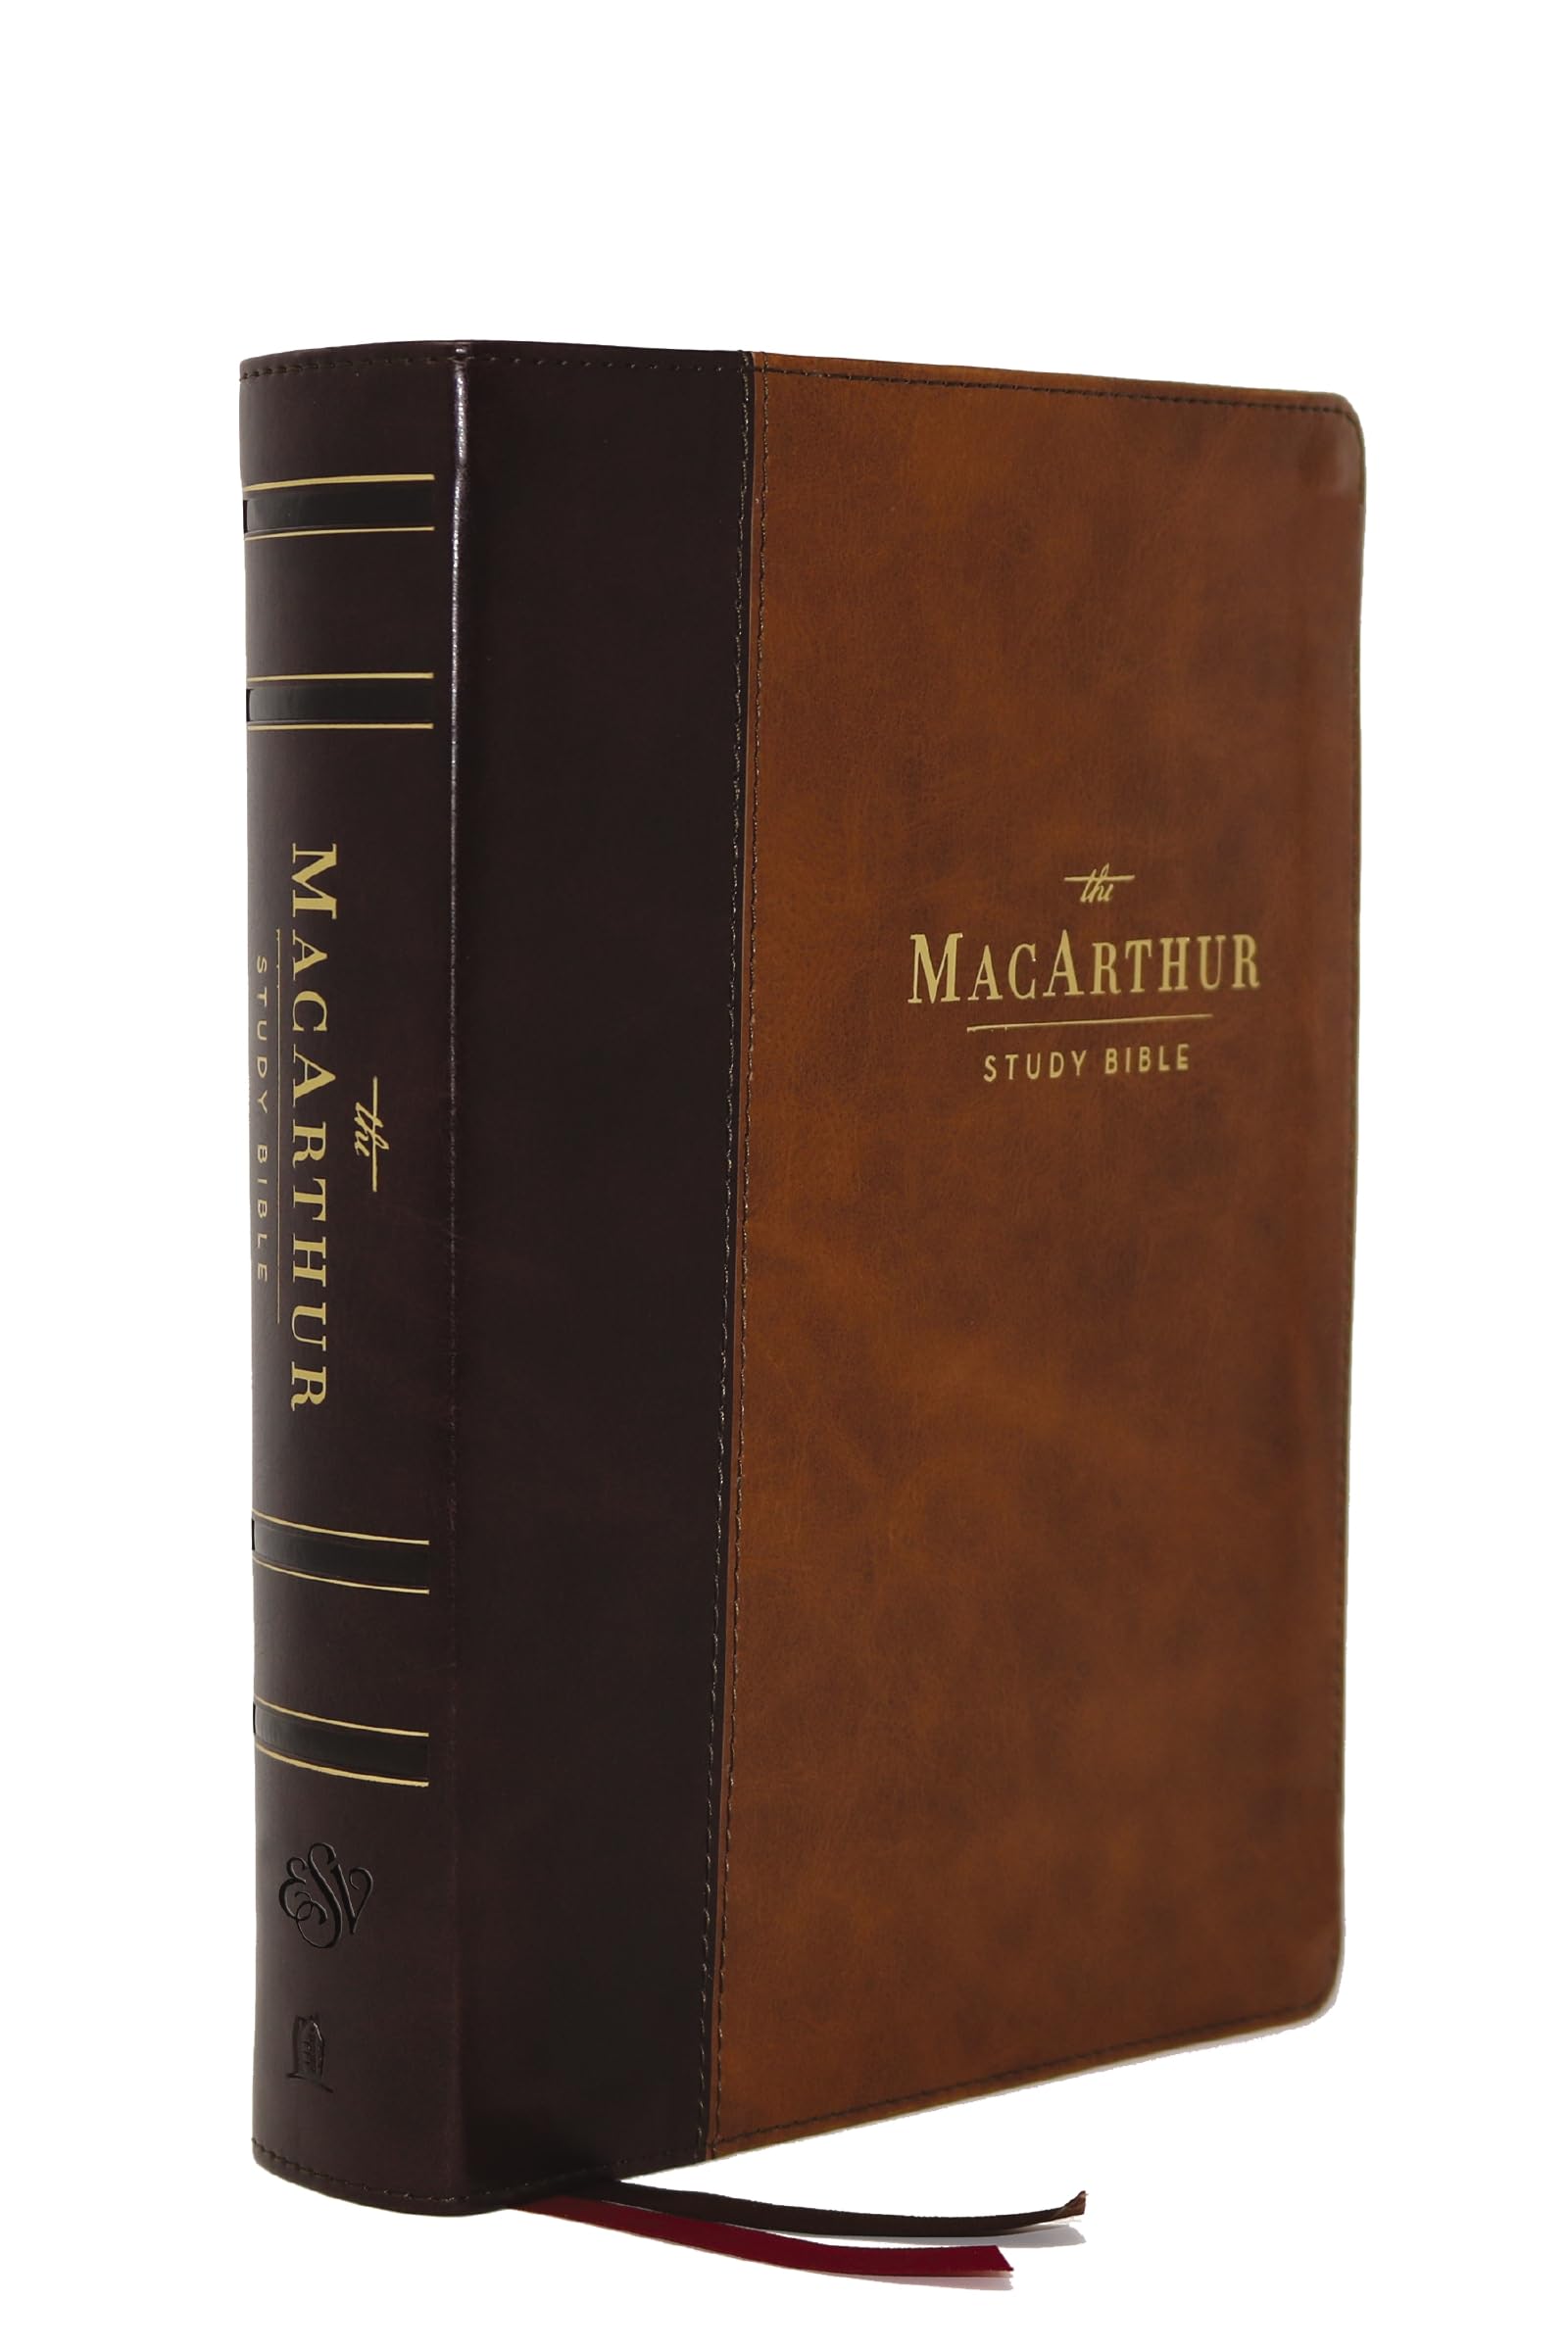 The Esv, MacArthur Study Bible, 2nd Edition, Leathersoft, Brown: Unleashing God's Truth One Verse at a Time by MacArthur, John F.